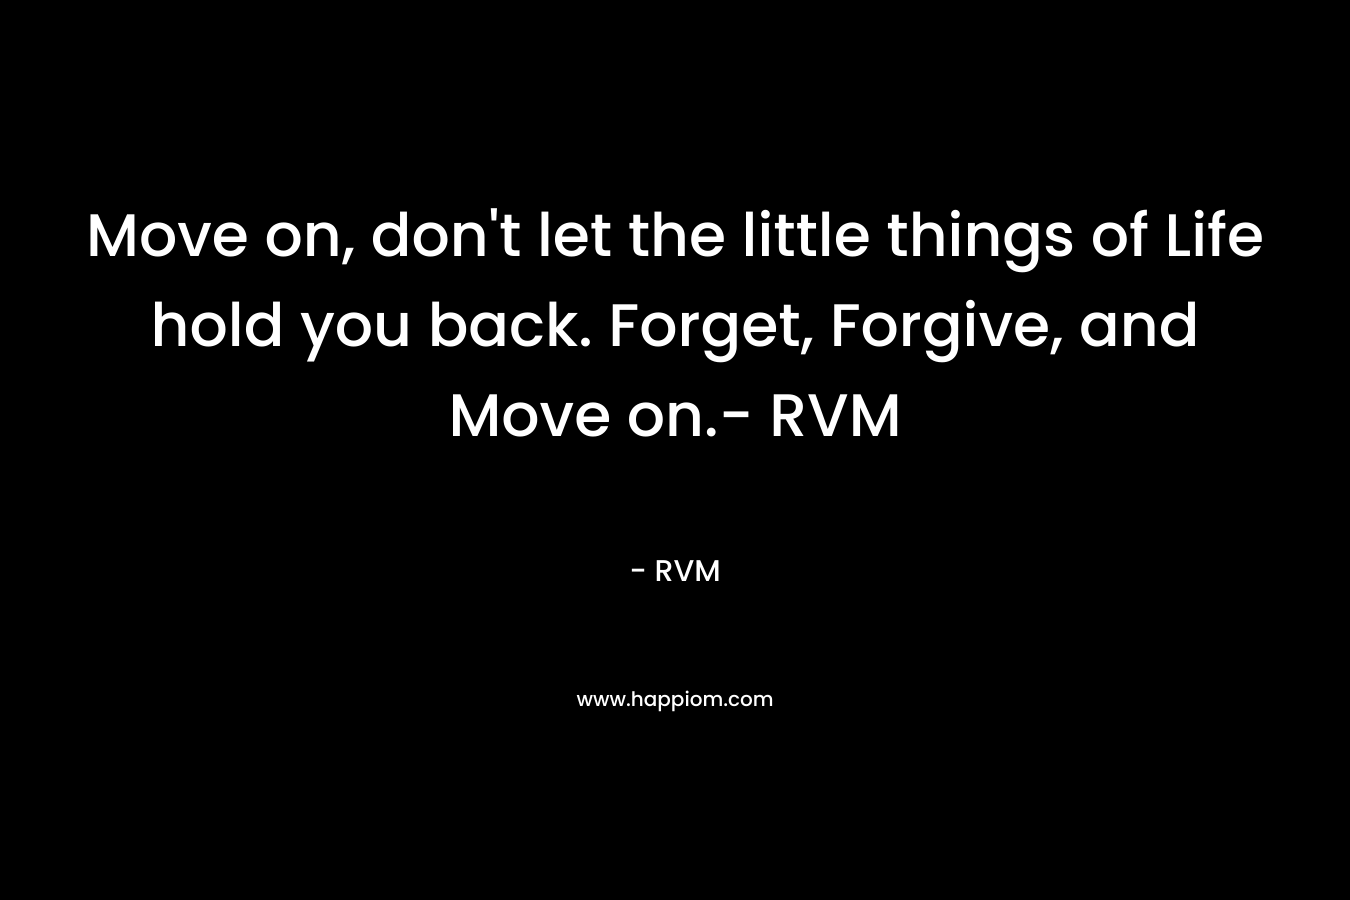 Move on, don't let the little things of Life hold you back. Forget, Forgive, and Move on.- RVM